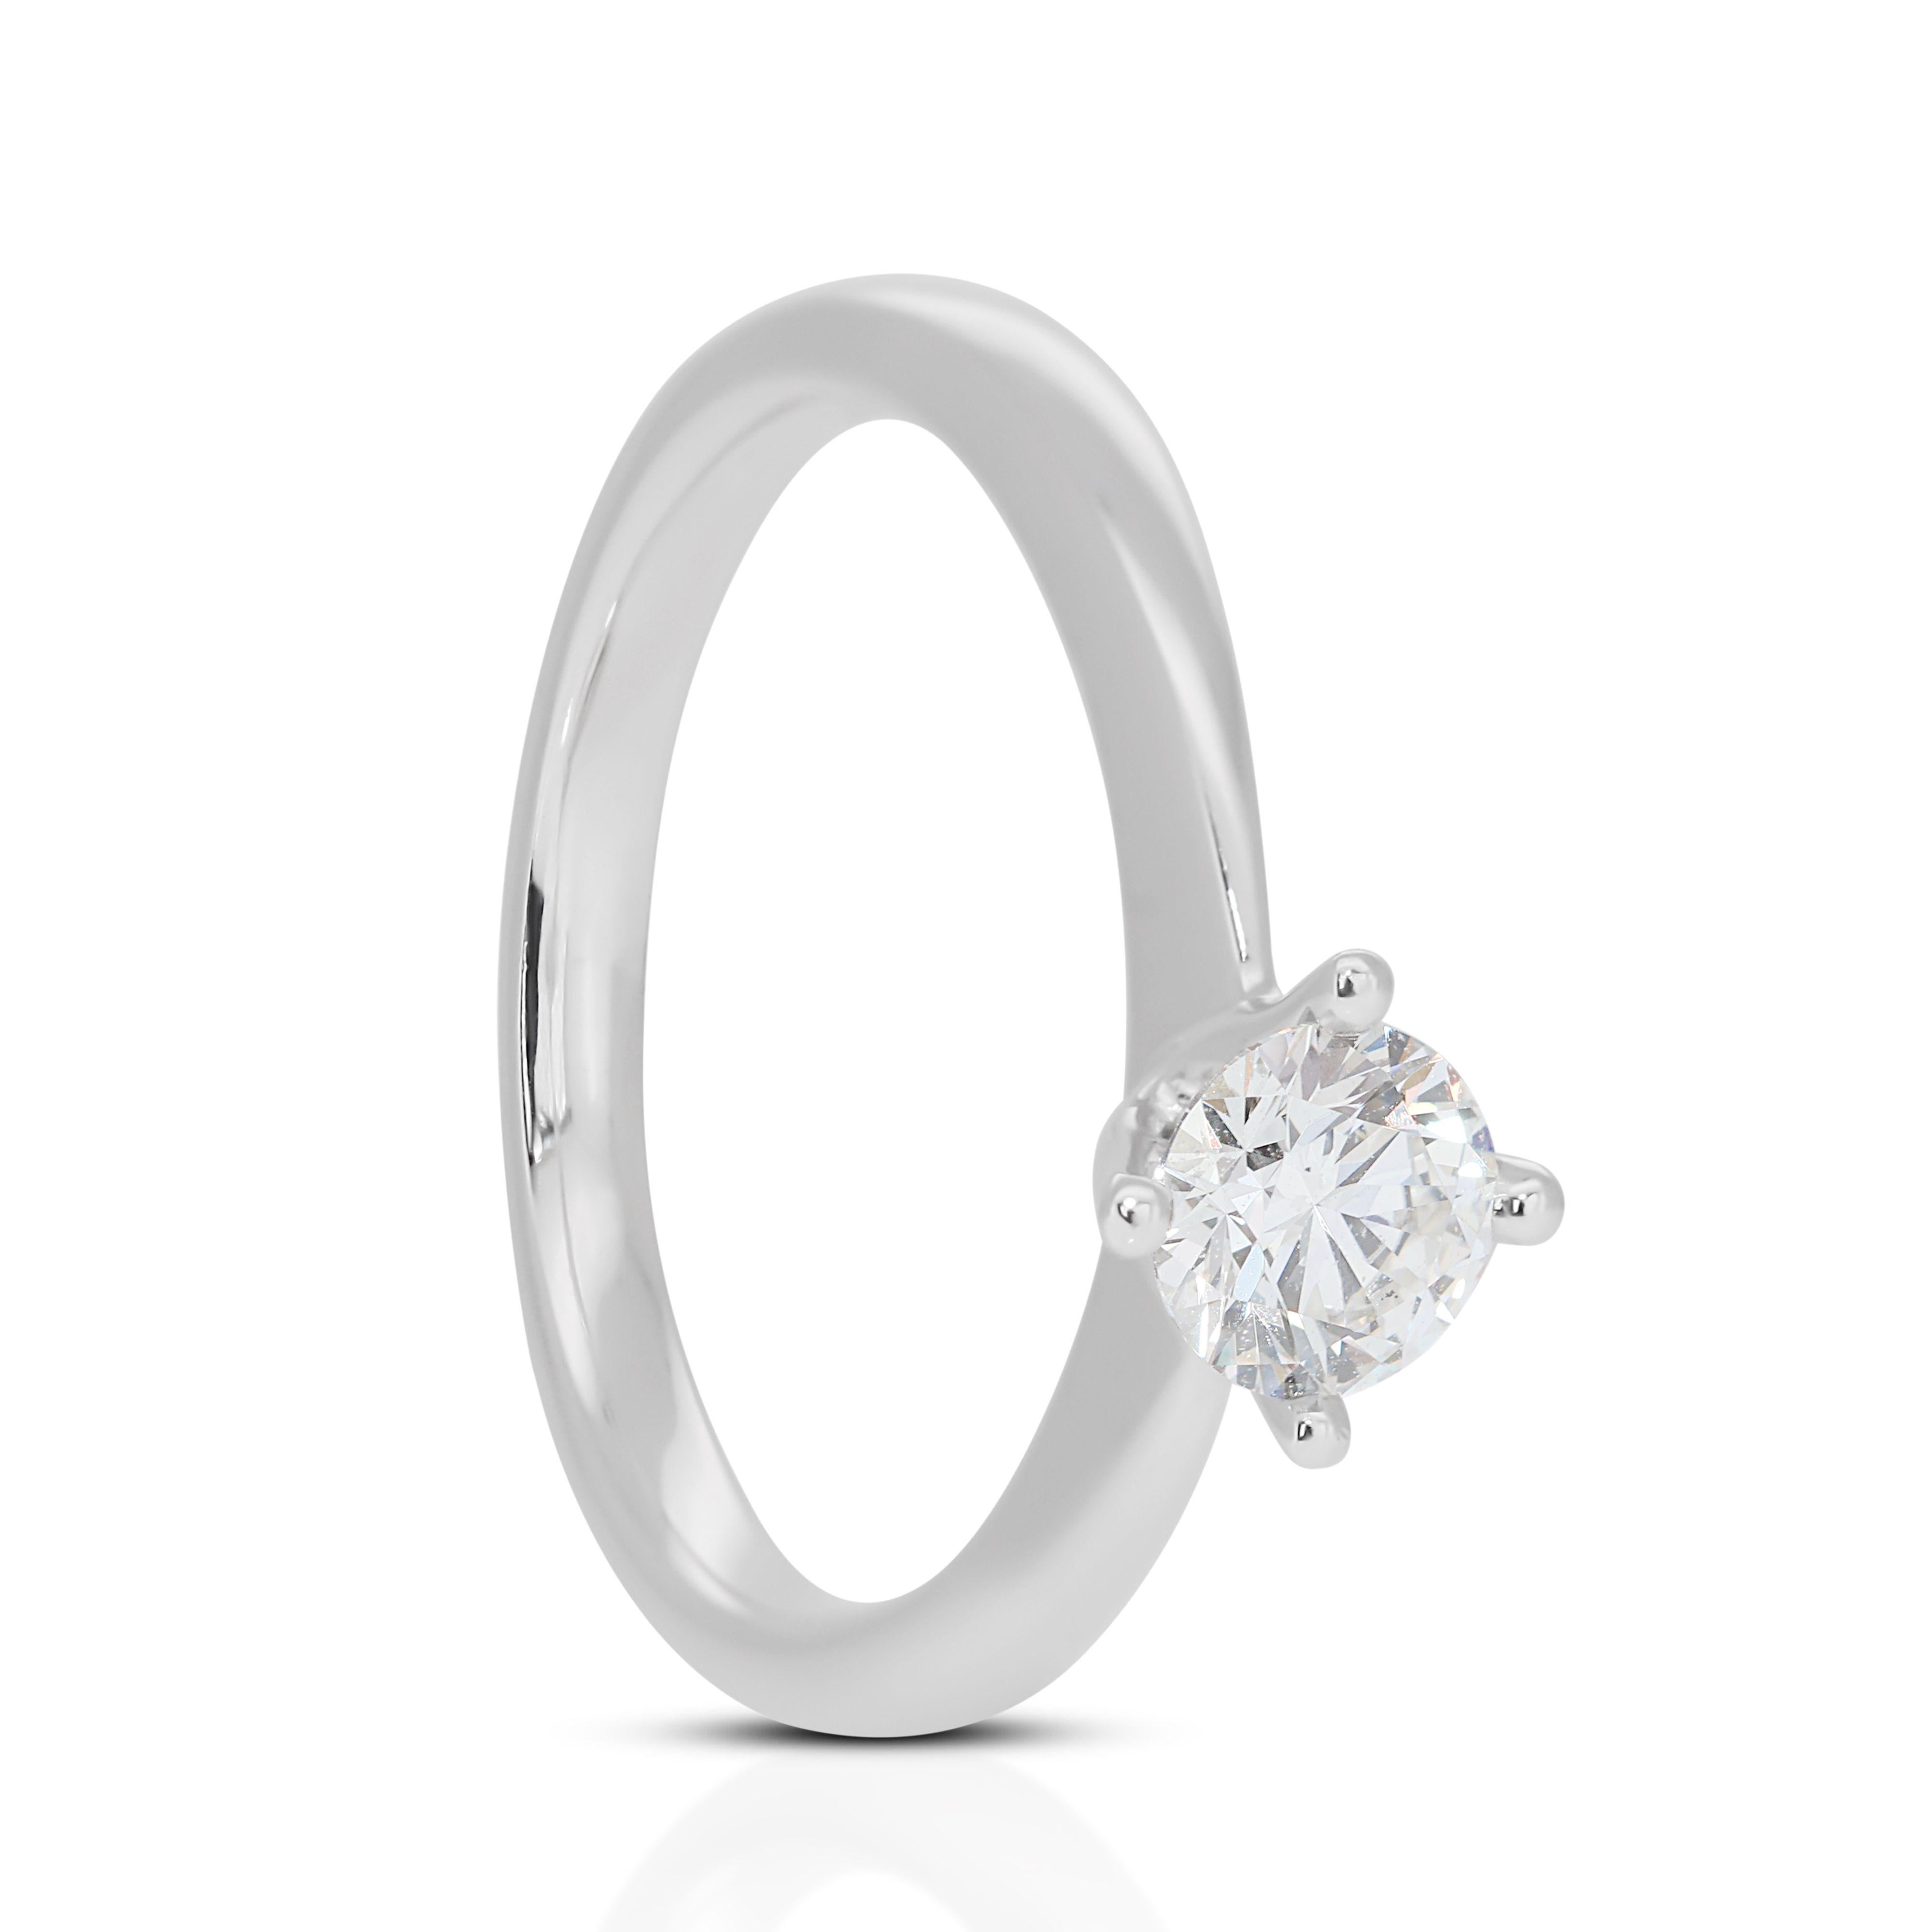 Women's Beautiful 18K White Gold Solitaire Diamond Ring with 0.32ct Diamond For Sale